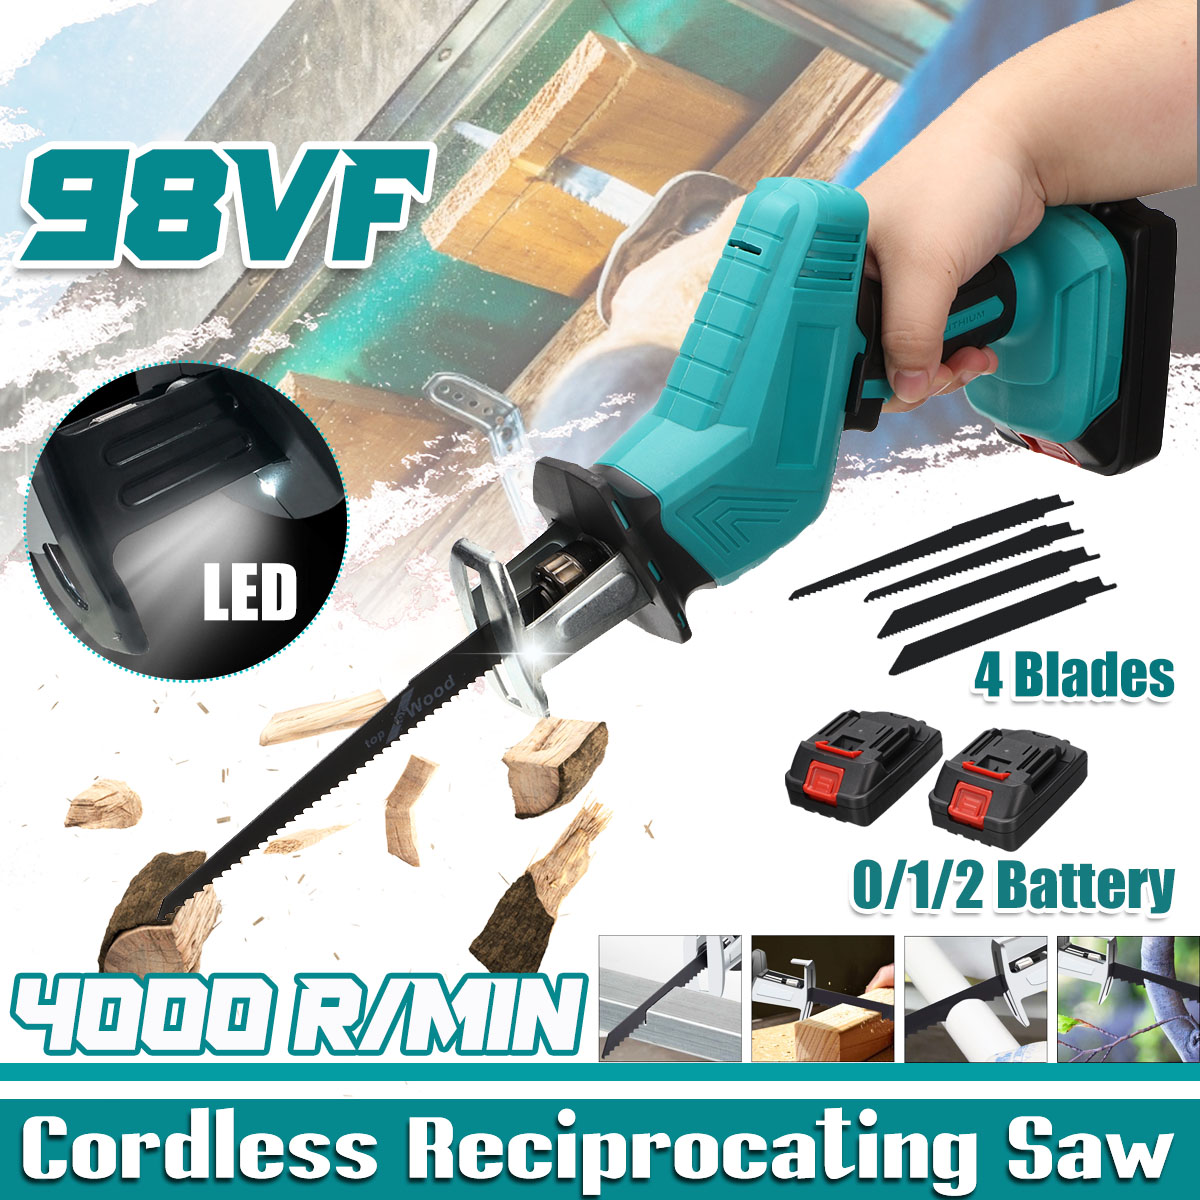 Cordless-Reciprocating-Saw-W-None12-Battery-For-Makita--4pcs-Saw-Blades-Woodworking-Wood-Cutter-Elec-1879913-1